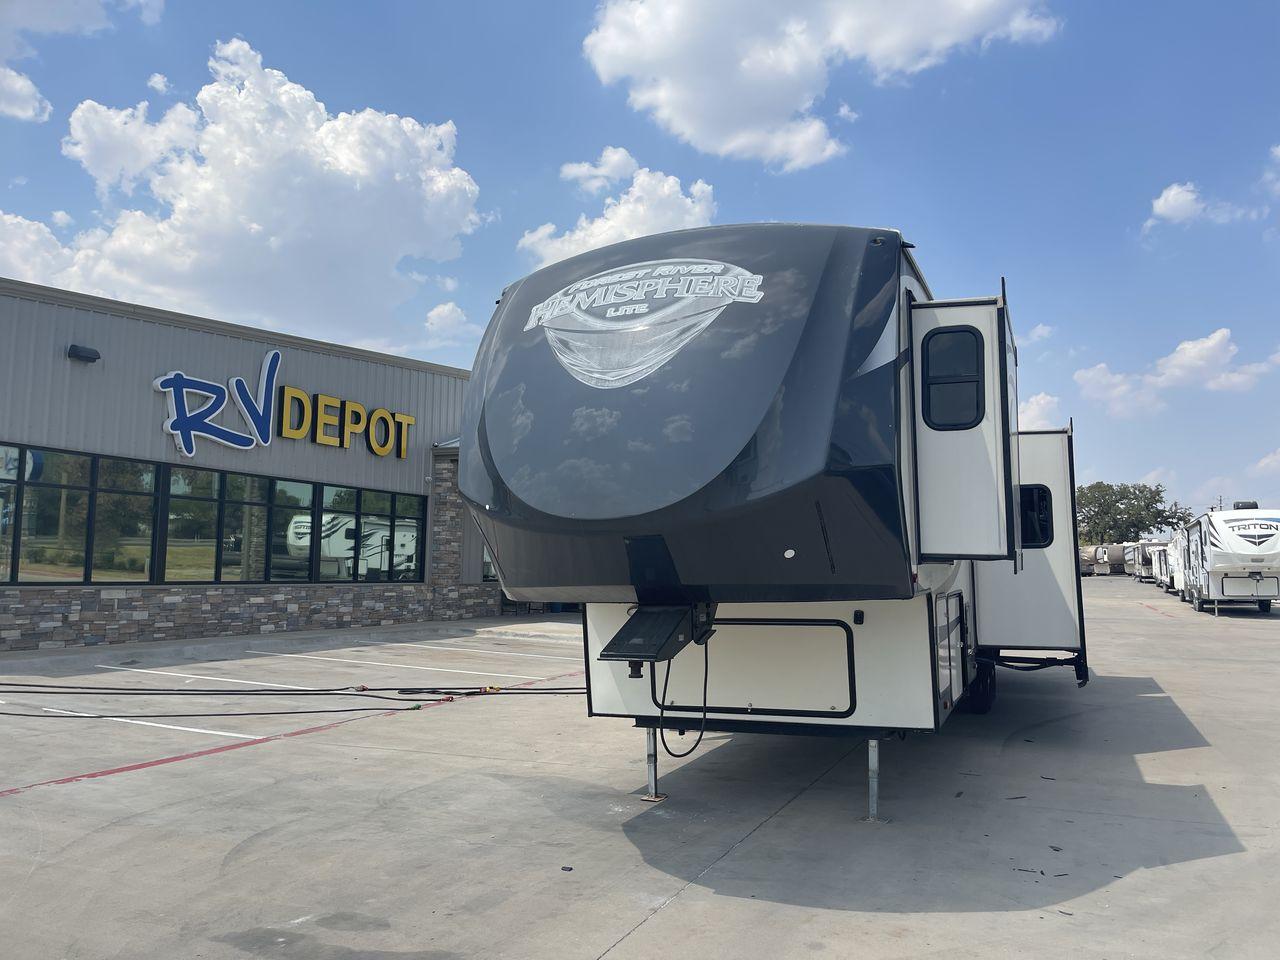 2016 TAN FOREST RIVER SALEMHEMISPHERE356QB (4X4FSBM24GU) , Length: 34 ft | Dry Weight: 7,294 lbs | Slides: 2 transmission, located at 4319 N Main St, Cleburne, TX, 76033, (817) 678-5133, 32.385960, -97.391212 - This 2016 Forest River Salem Hemisphere Travel Trailer measures just over 34 feet long and 8 feet wide with a dry weight of 7,294 lbs. It has a payload capacity of 2,351 lbs and a hitch weight of 845 lbs. This unit also comes with an automatic heating and cooling rate of 30,000 and 13,500 BTUs, resp - Photo #0